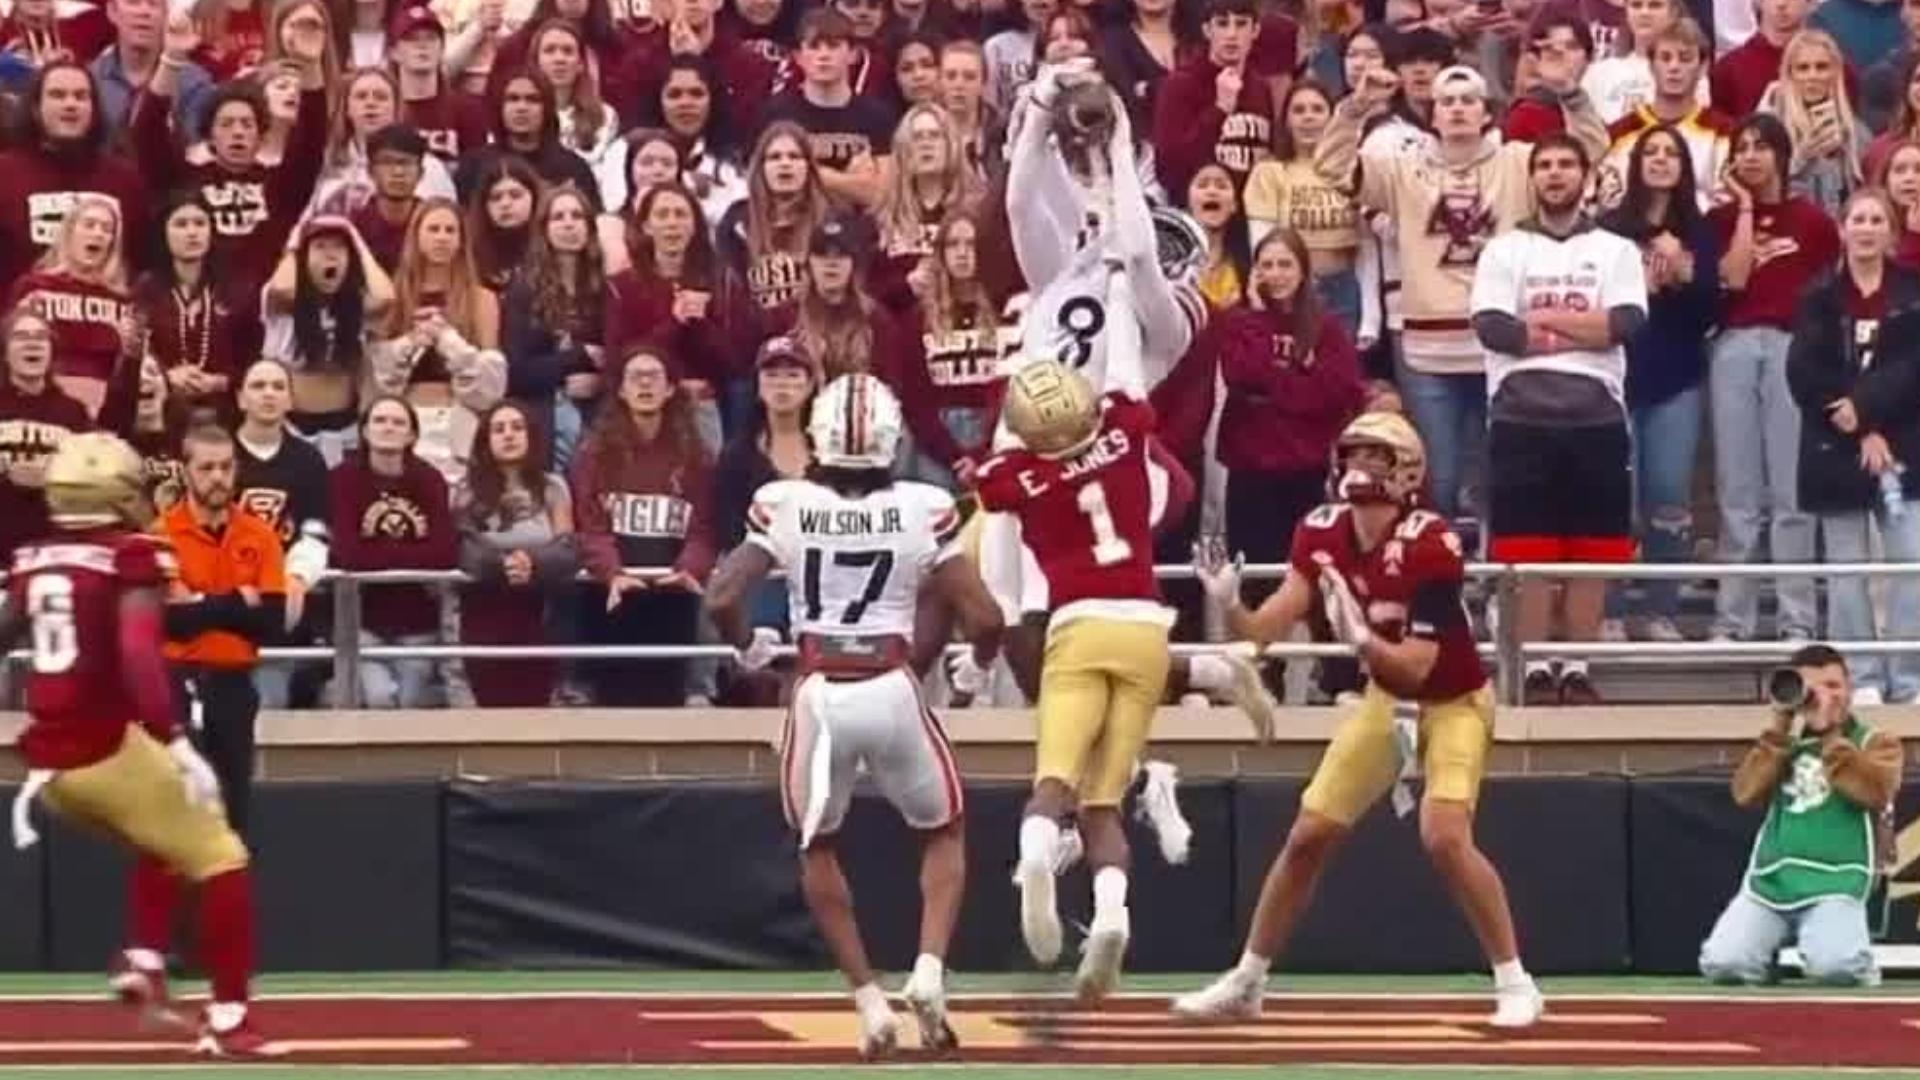 Malachi Fields climbs the ladder for an incredible TD grab